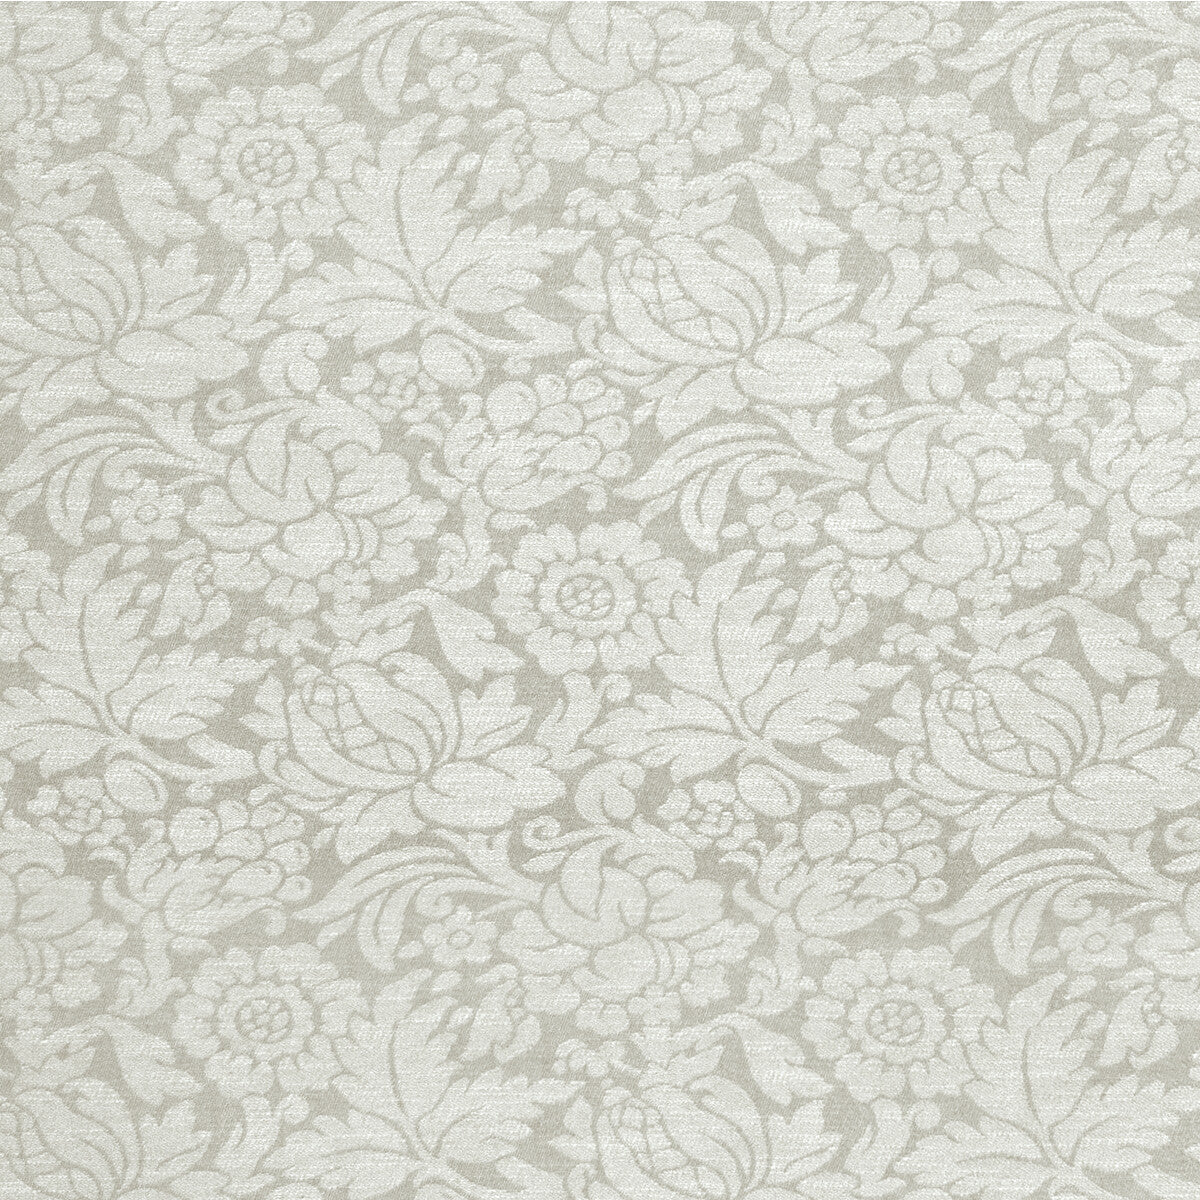 Shabby Damask fabric in snow color - pattern 36870.101.0 - by Kravet Couture in the Atelier Weaves collection